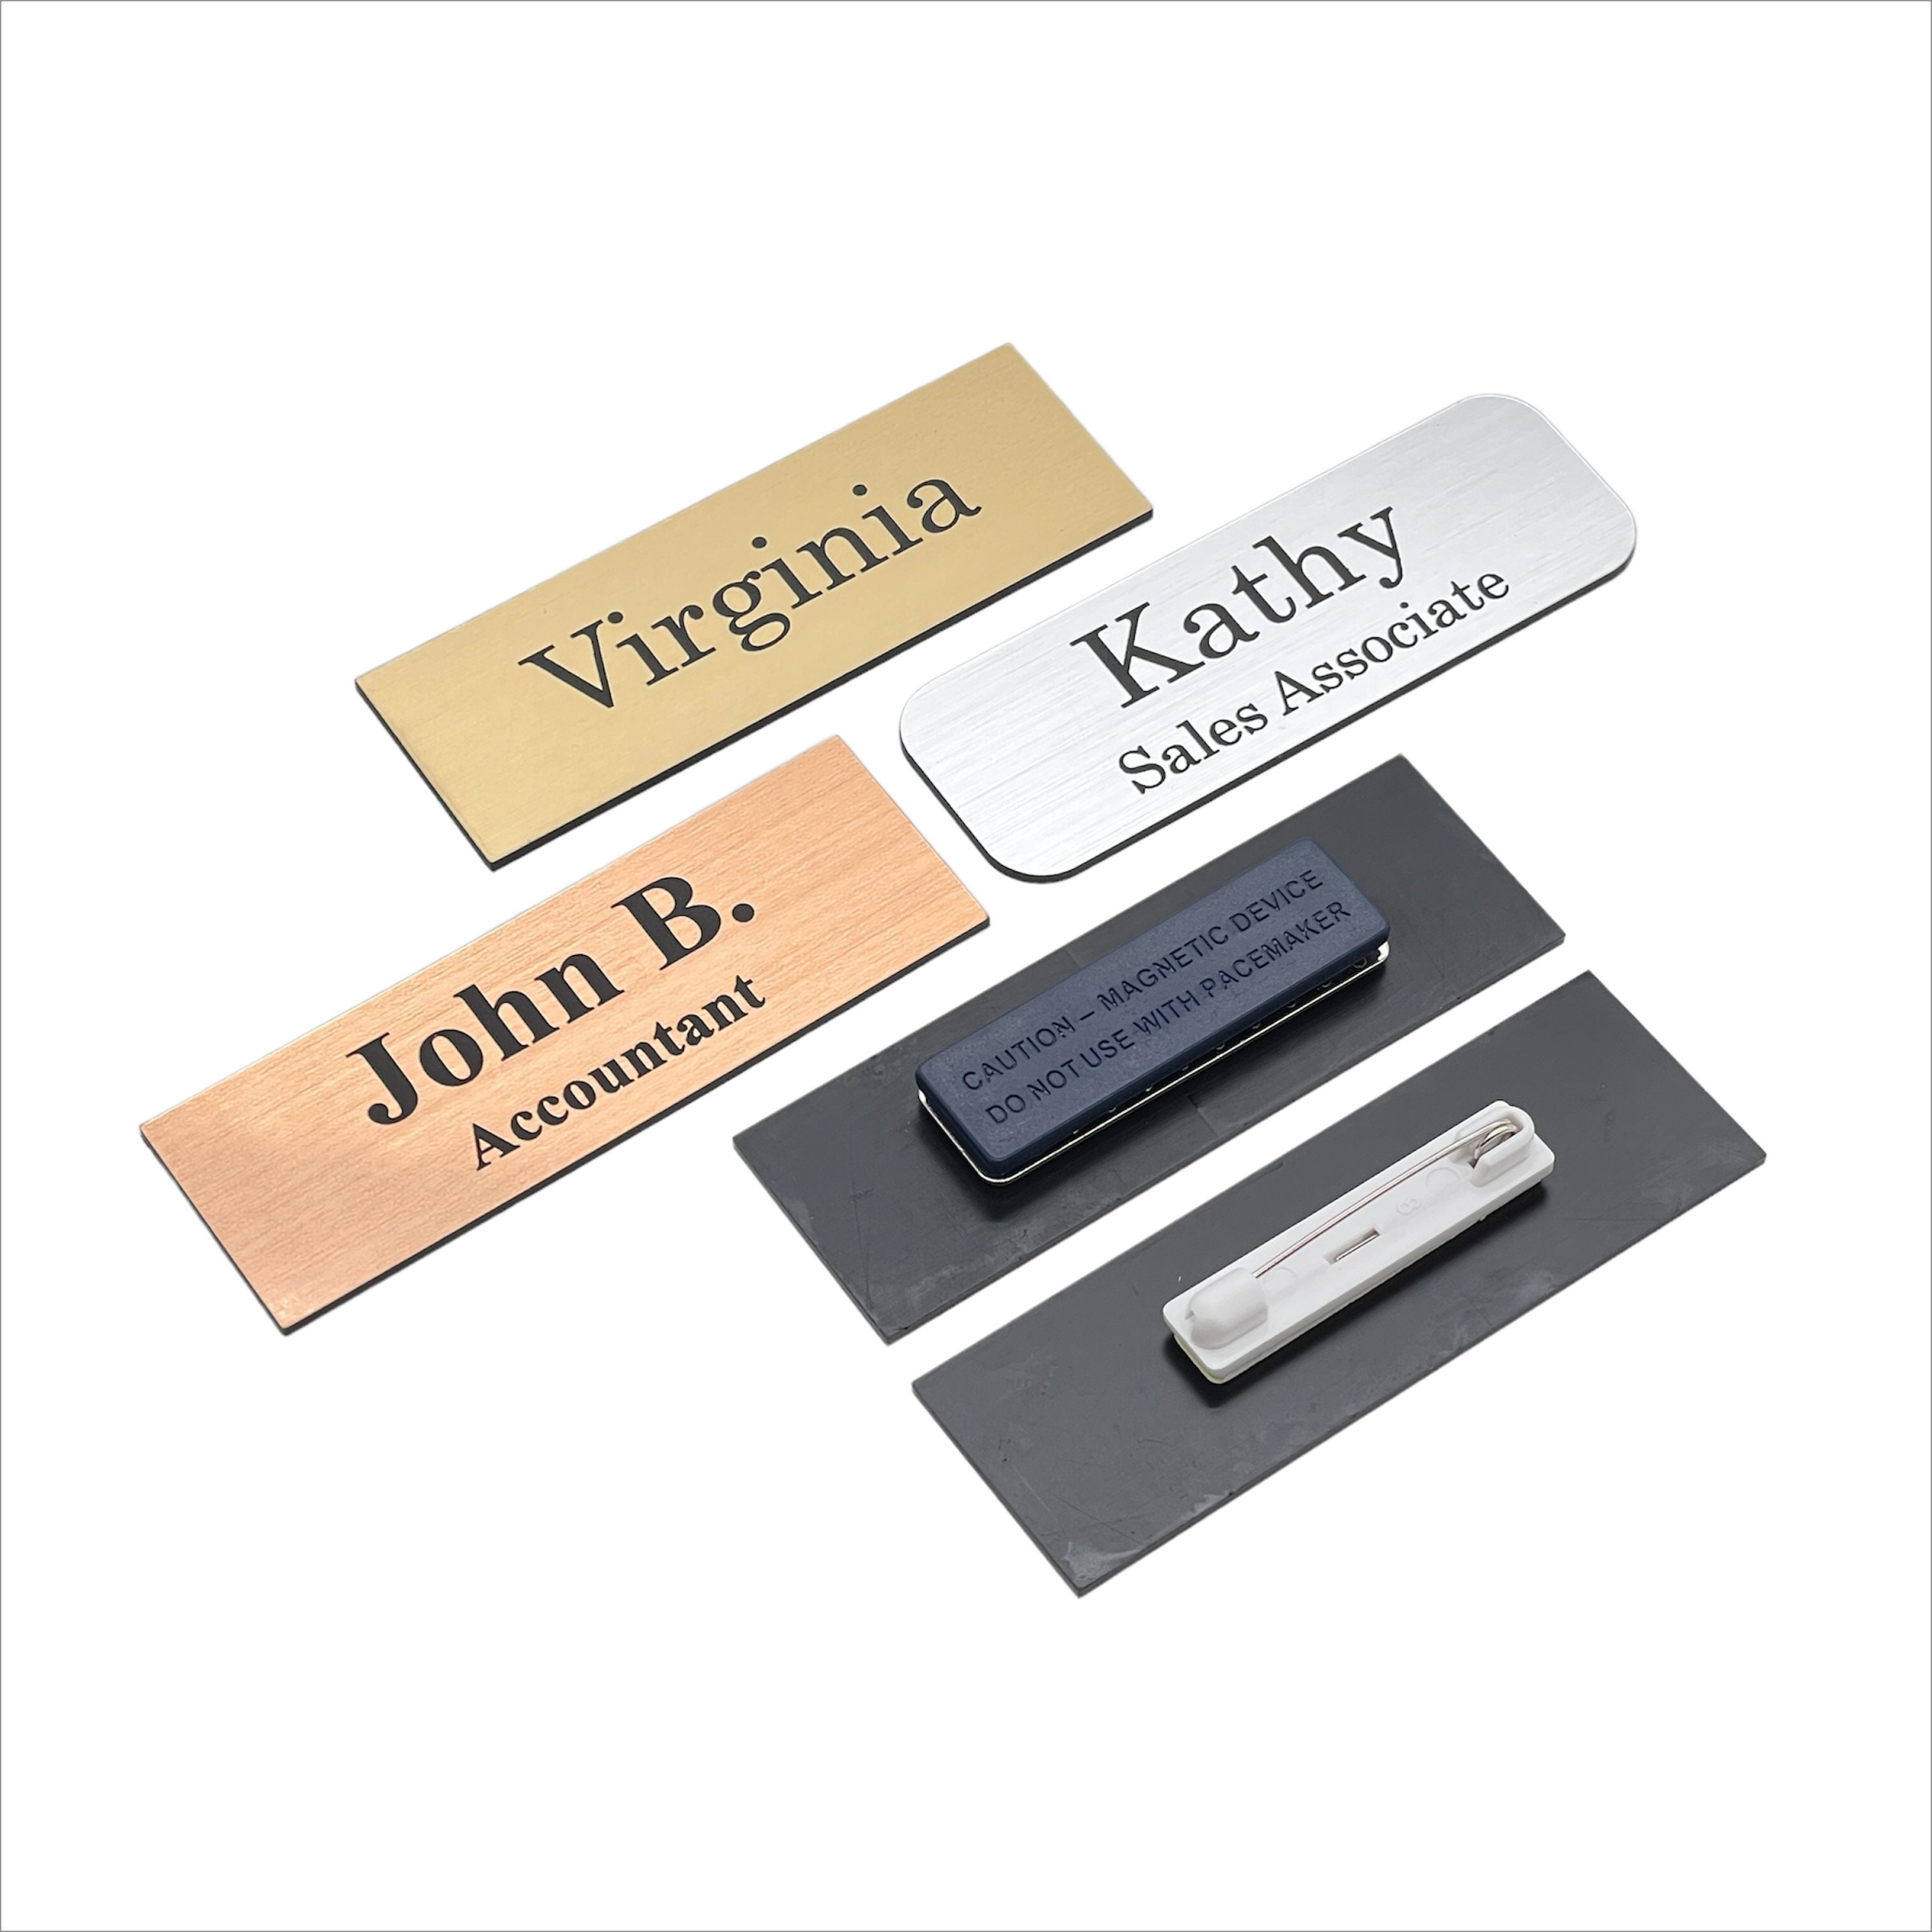 Name Badges / Name Tags / ID Tags / Trophy or Picture Labels - Lasercrafting